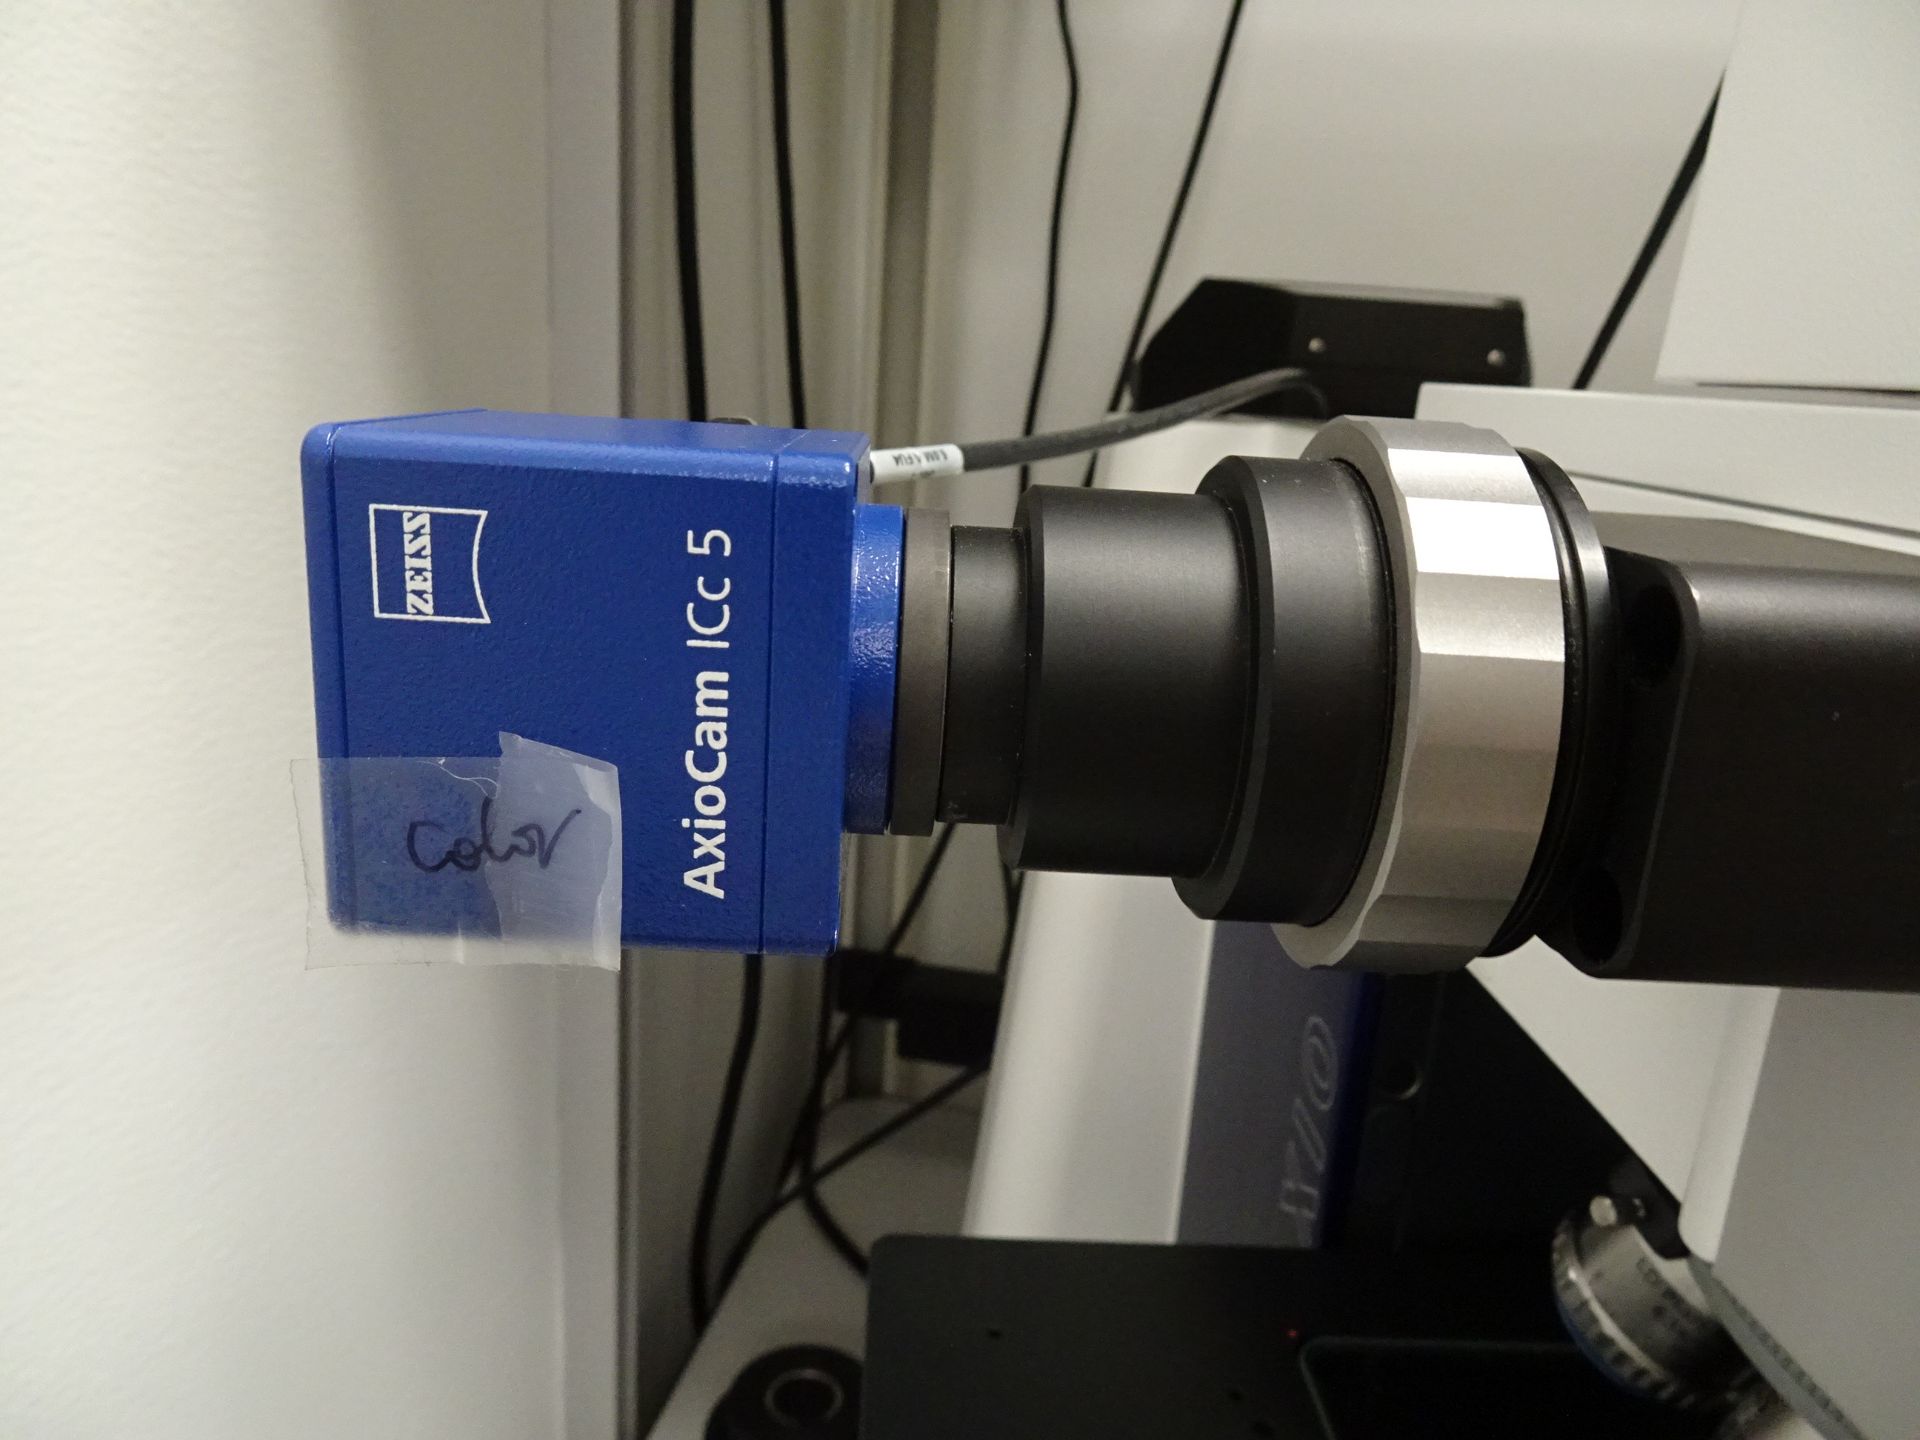 Zeiss Axio Imager.M2 Microscope With AxioCam MRM Camers With 60N-C 1" Camera Adapter, (2) 1PL 10x/23 - Image 9 of 22